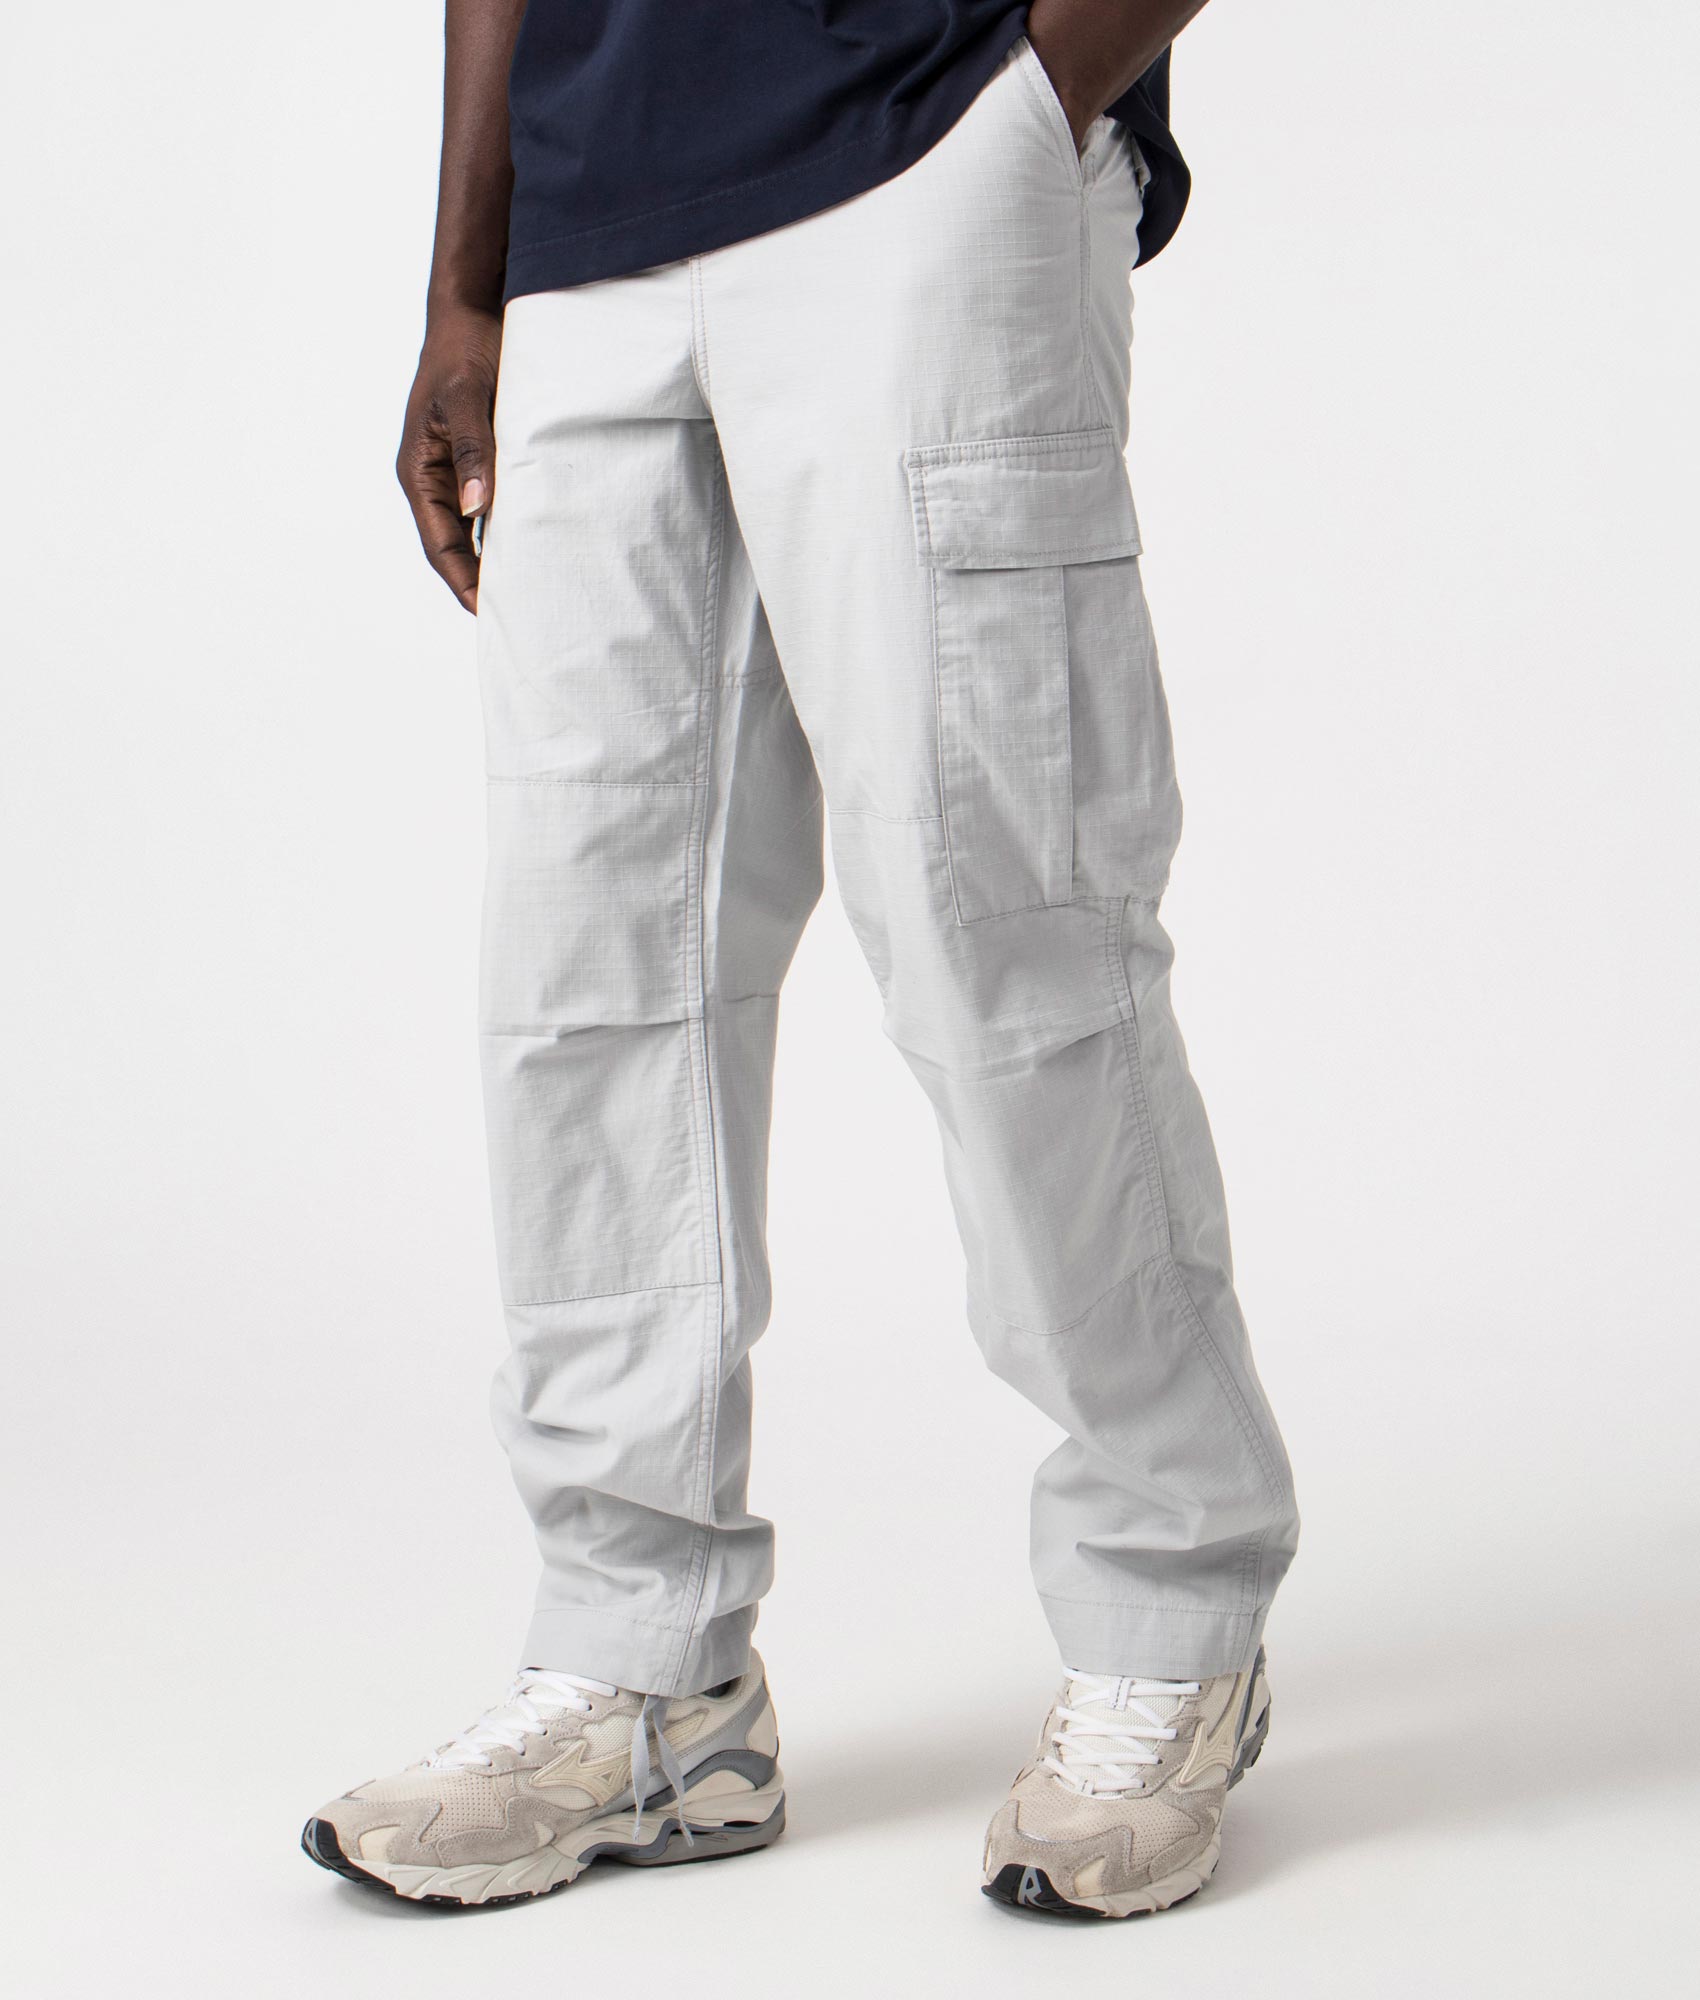 Carhartt WIP Mens Regular Fit Cargo Pants - Colour: 1YE02 Sonic Silver - Size: 32S